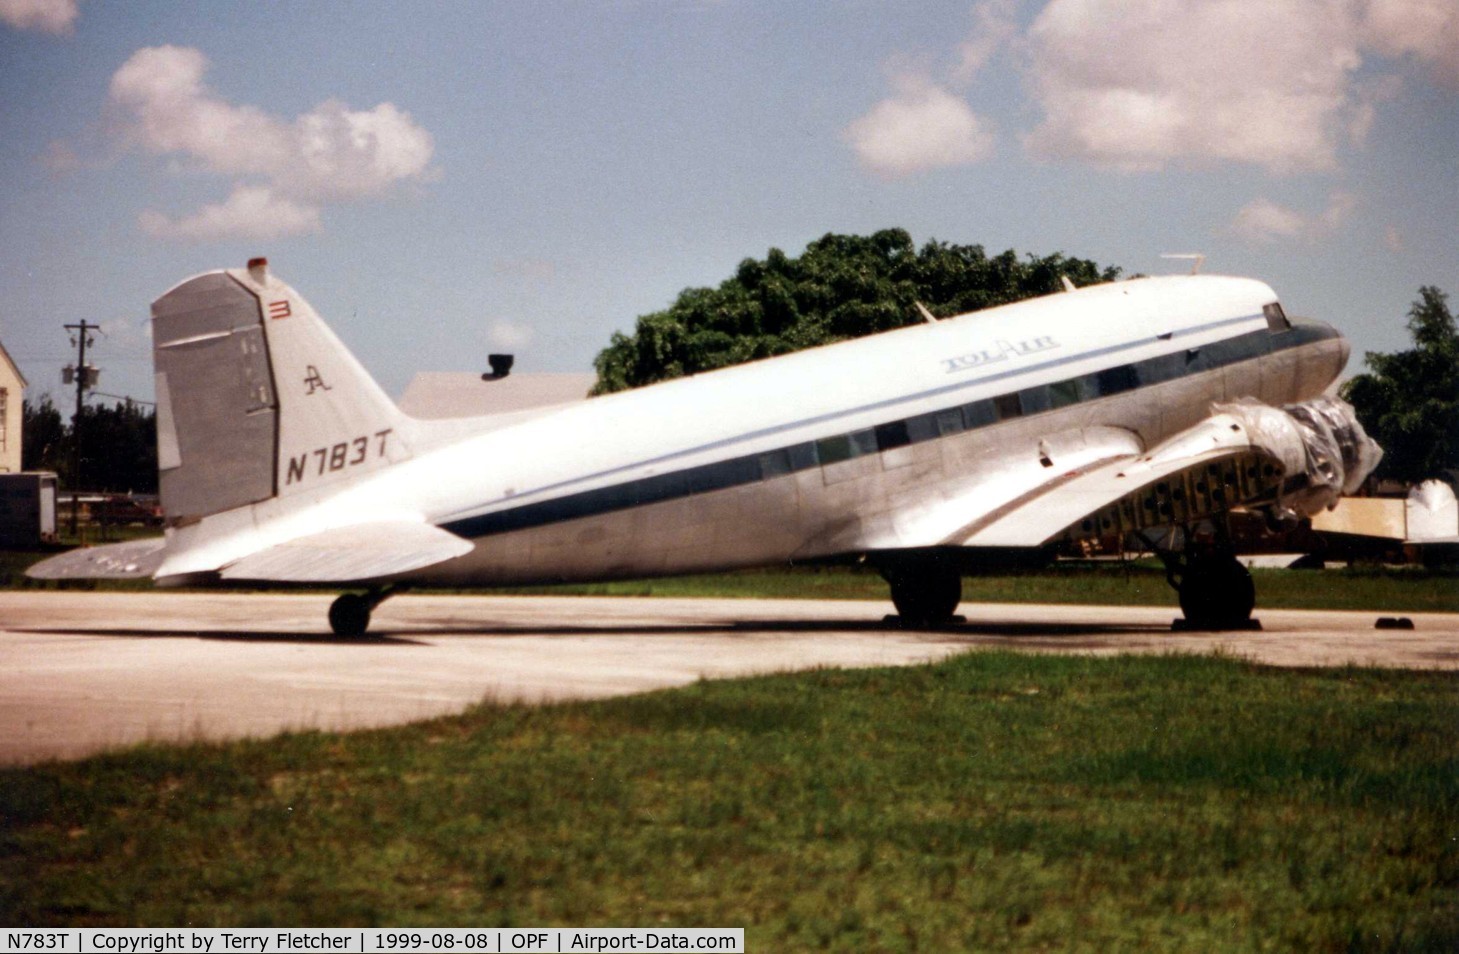 N783T, 1941 Douglas DC3C C/N 4219, This sorry looking DC3 was photographed at Opa Locka in 1999